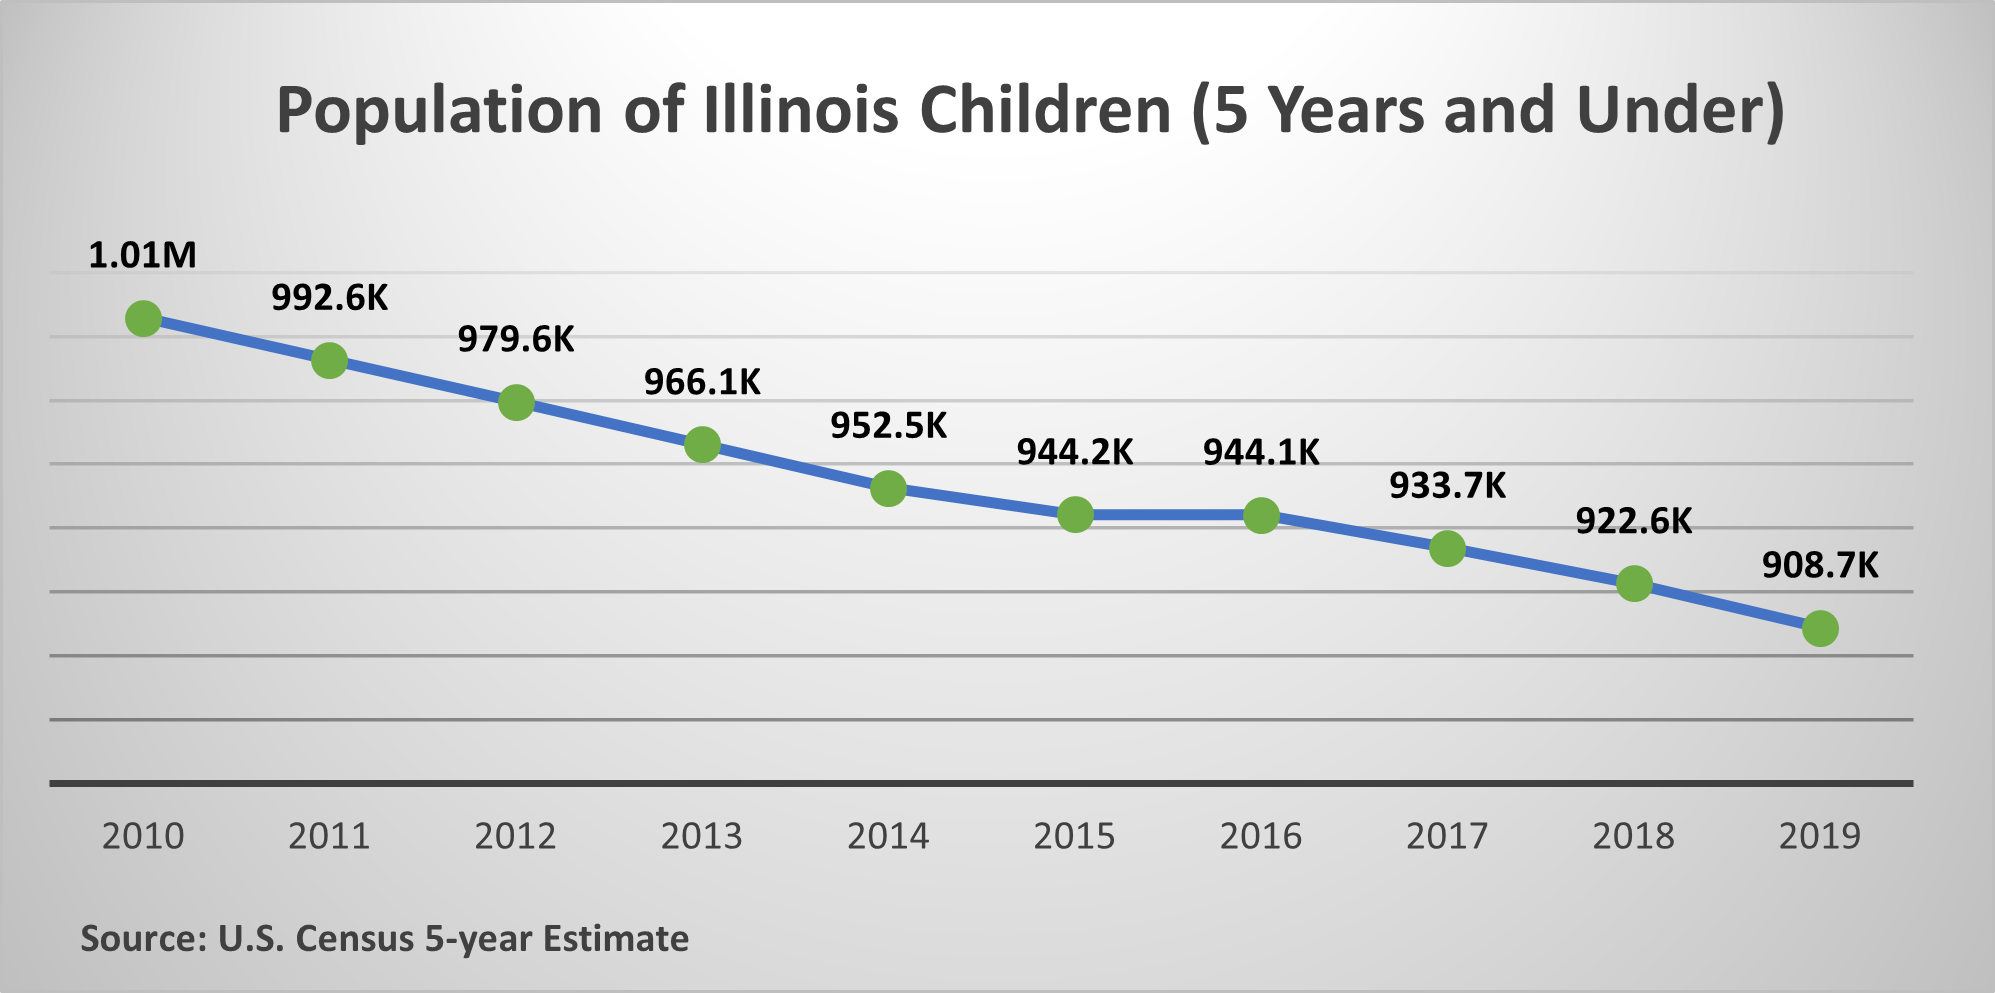 trend line showing the population of young children (5 years and under) gradually decreasing from 2010 to 2019 in Illinois.